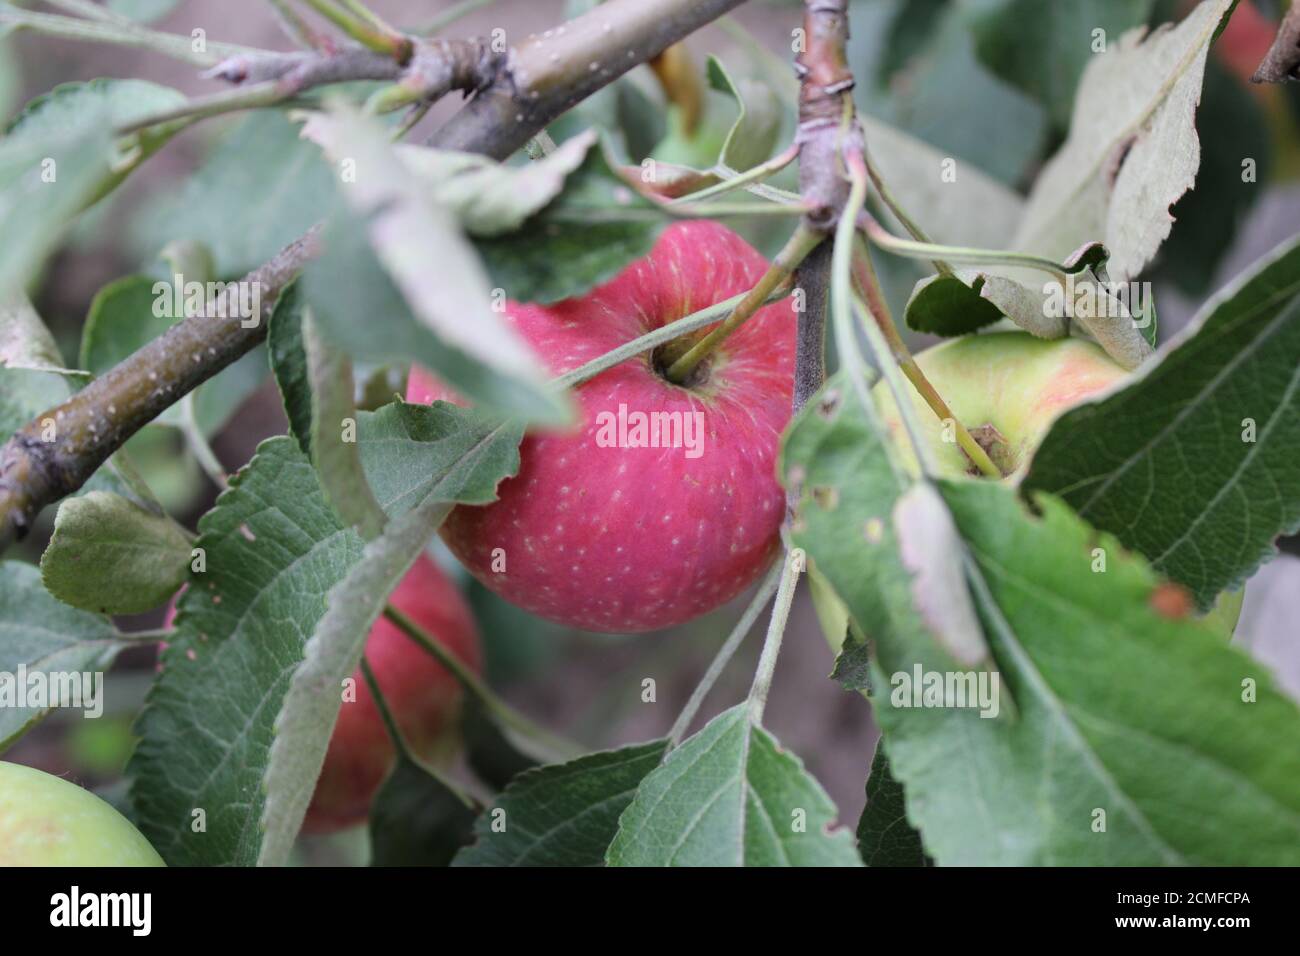 Red ripe apples on branch 20510 Stock Photo